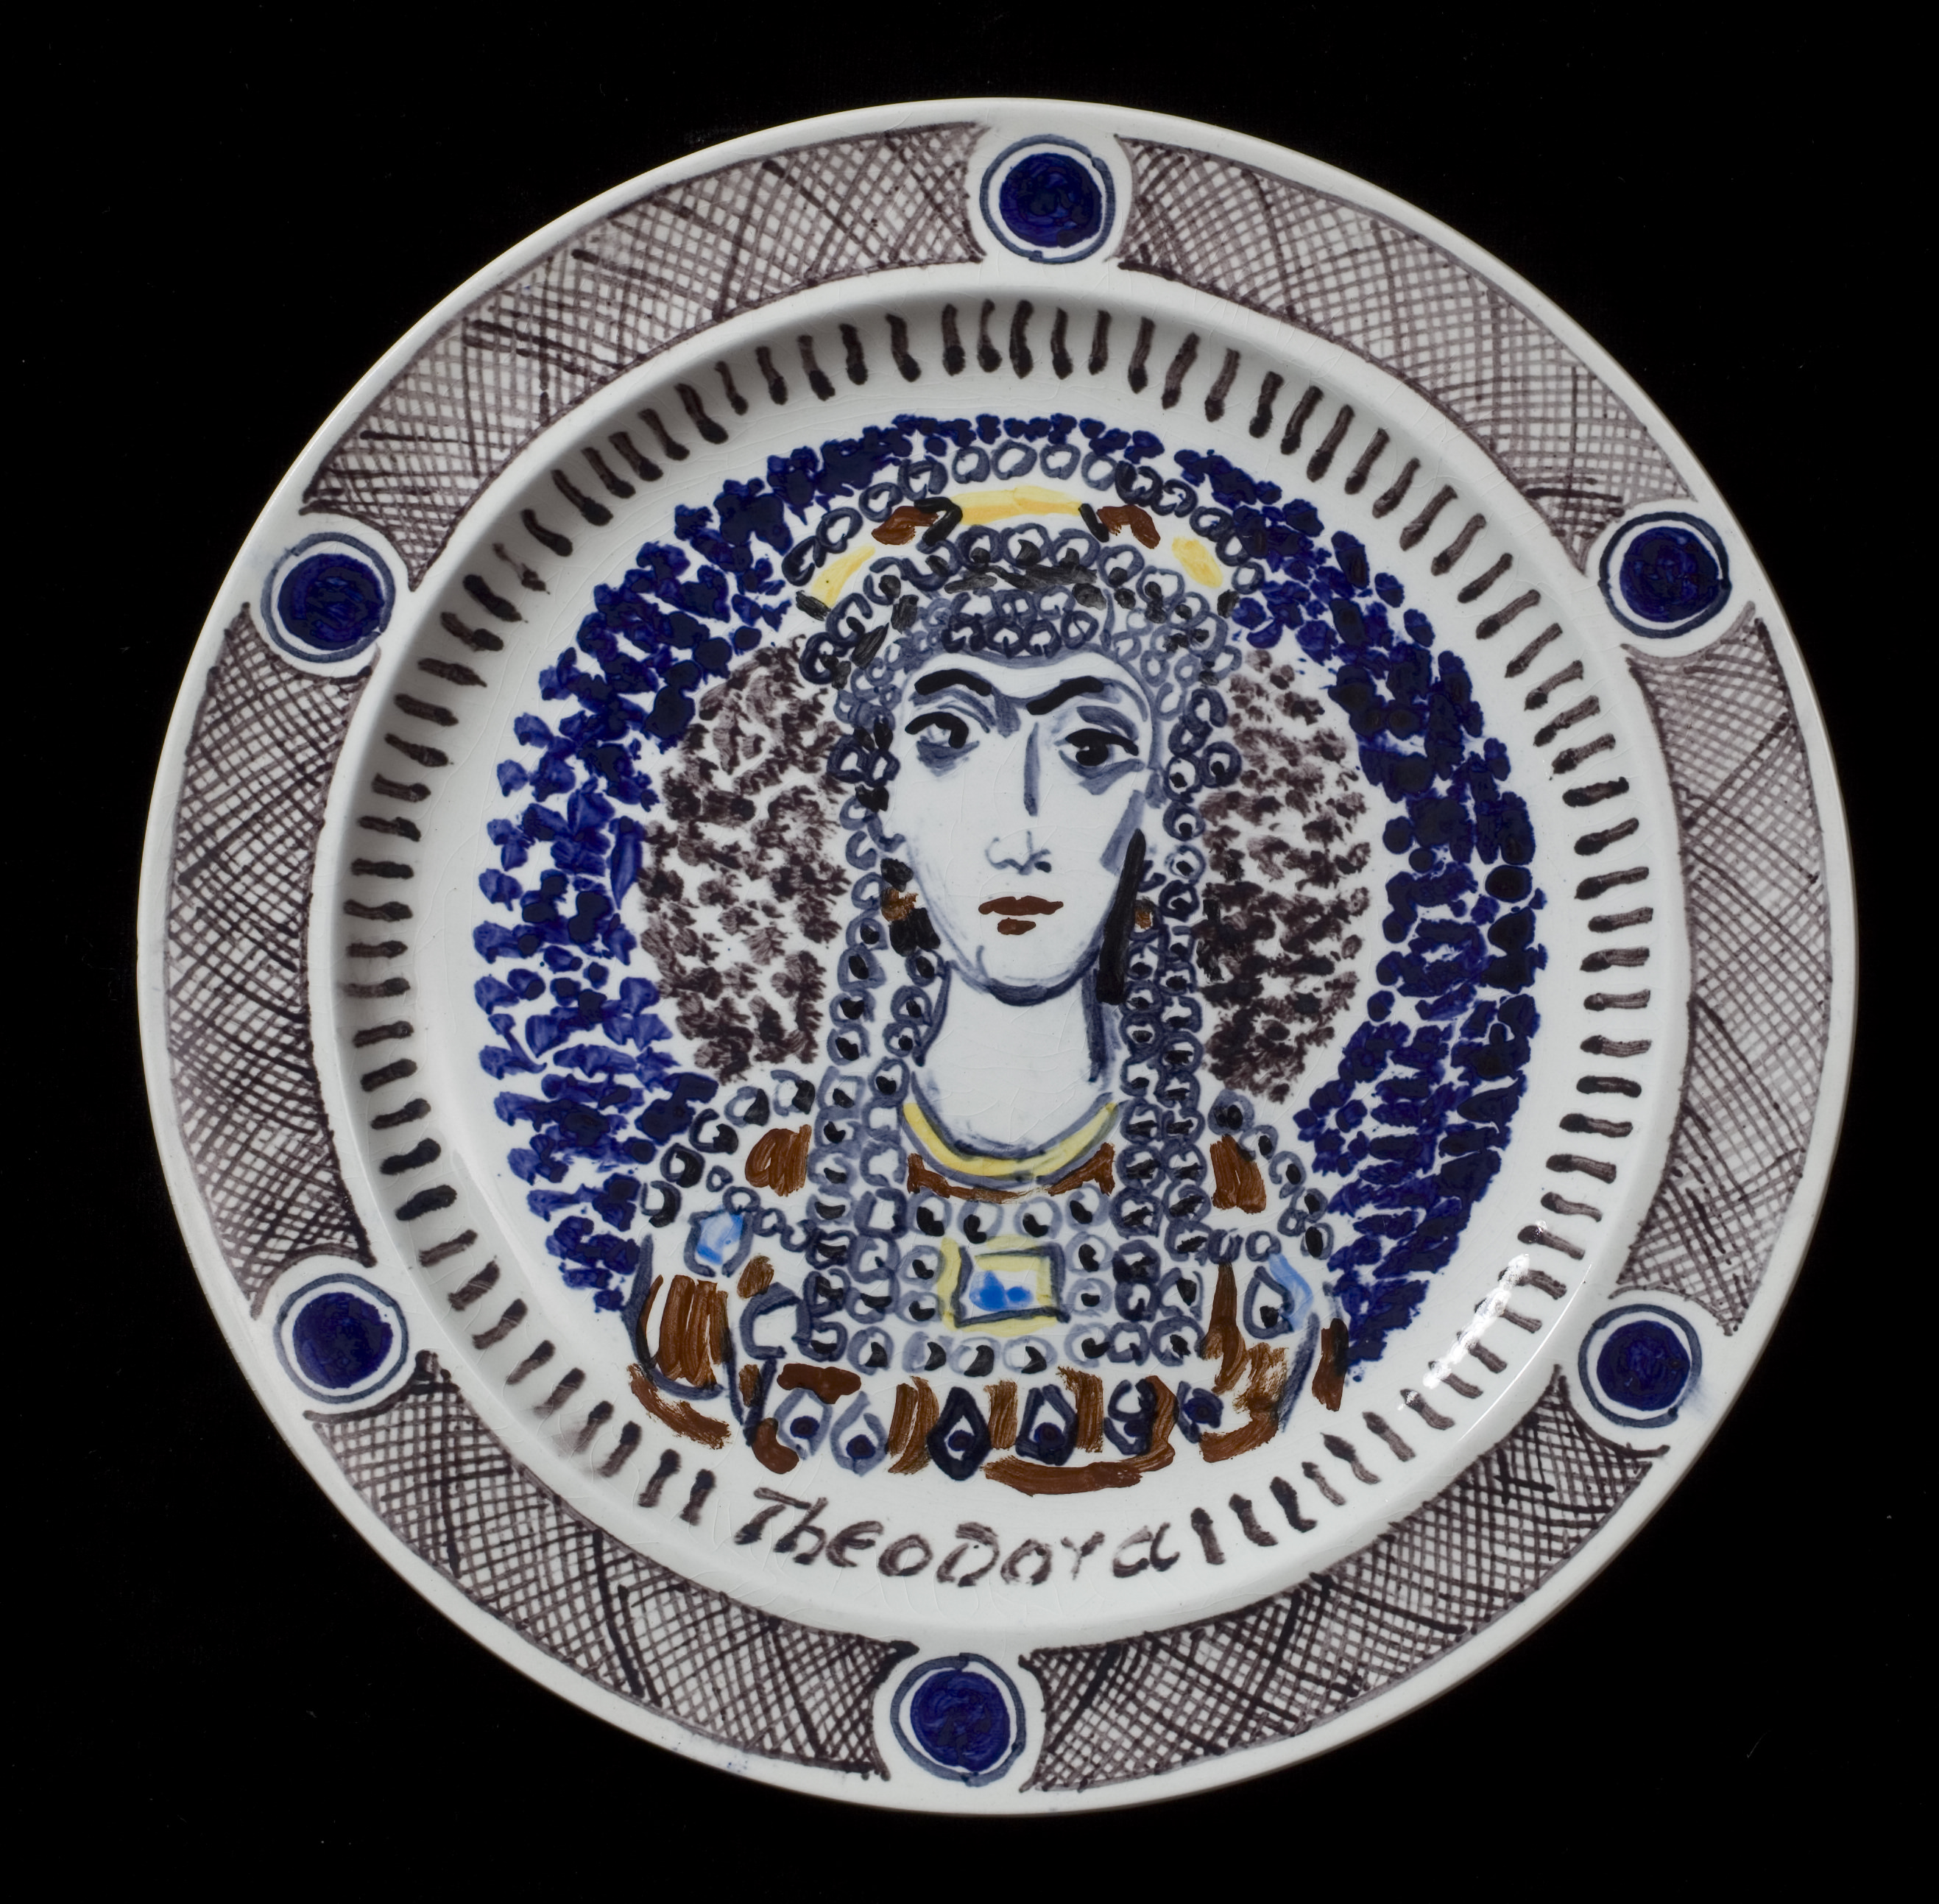 ,detail from <i>Famous Women</i>, circa 1932-4, 25.5 cm diameter, ceramicirca Copyright the Estate of Vanessa Bell, courtesy of Henrietta Garnett, and the Estate of Duncan Grant. All rights reserved, DACS 2017.